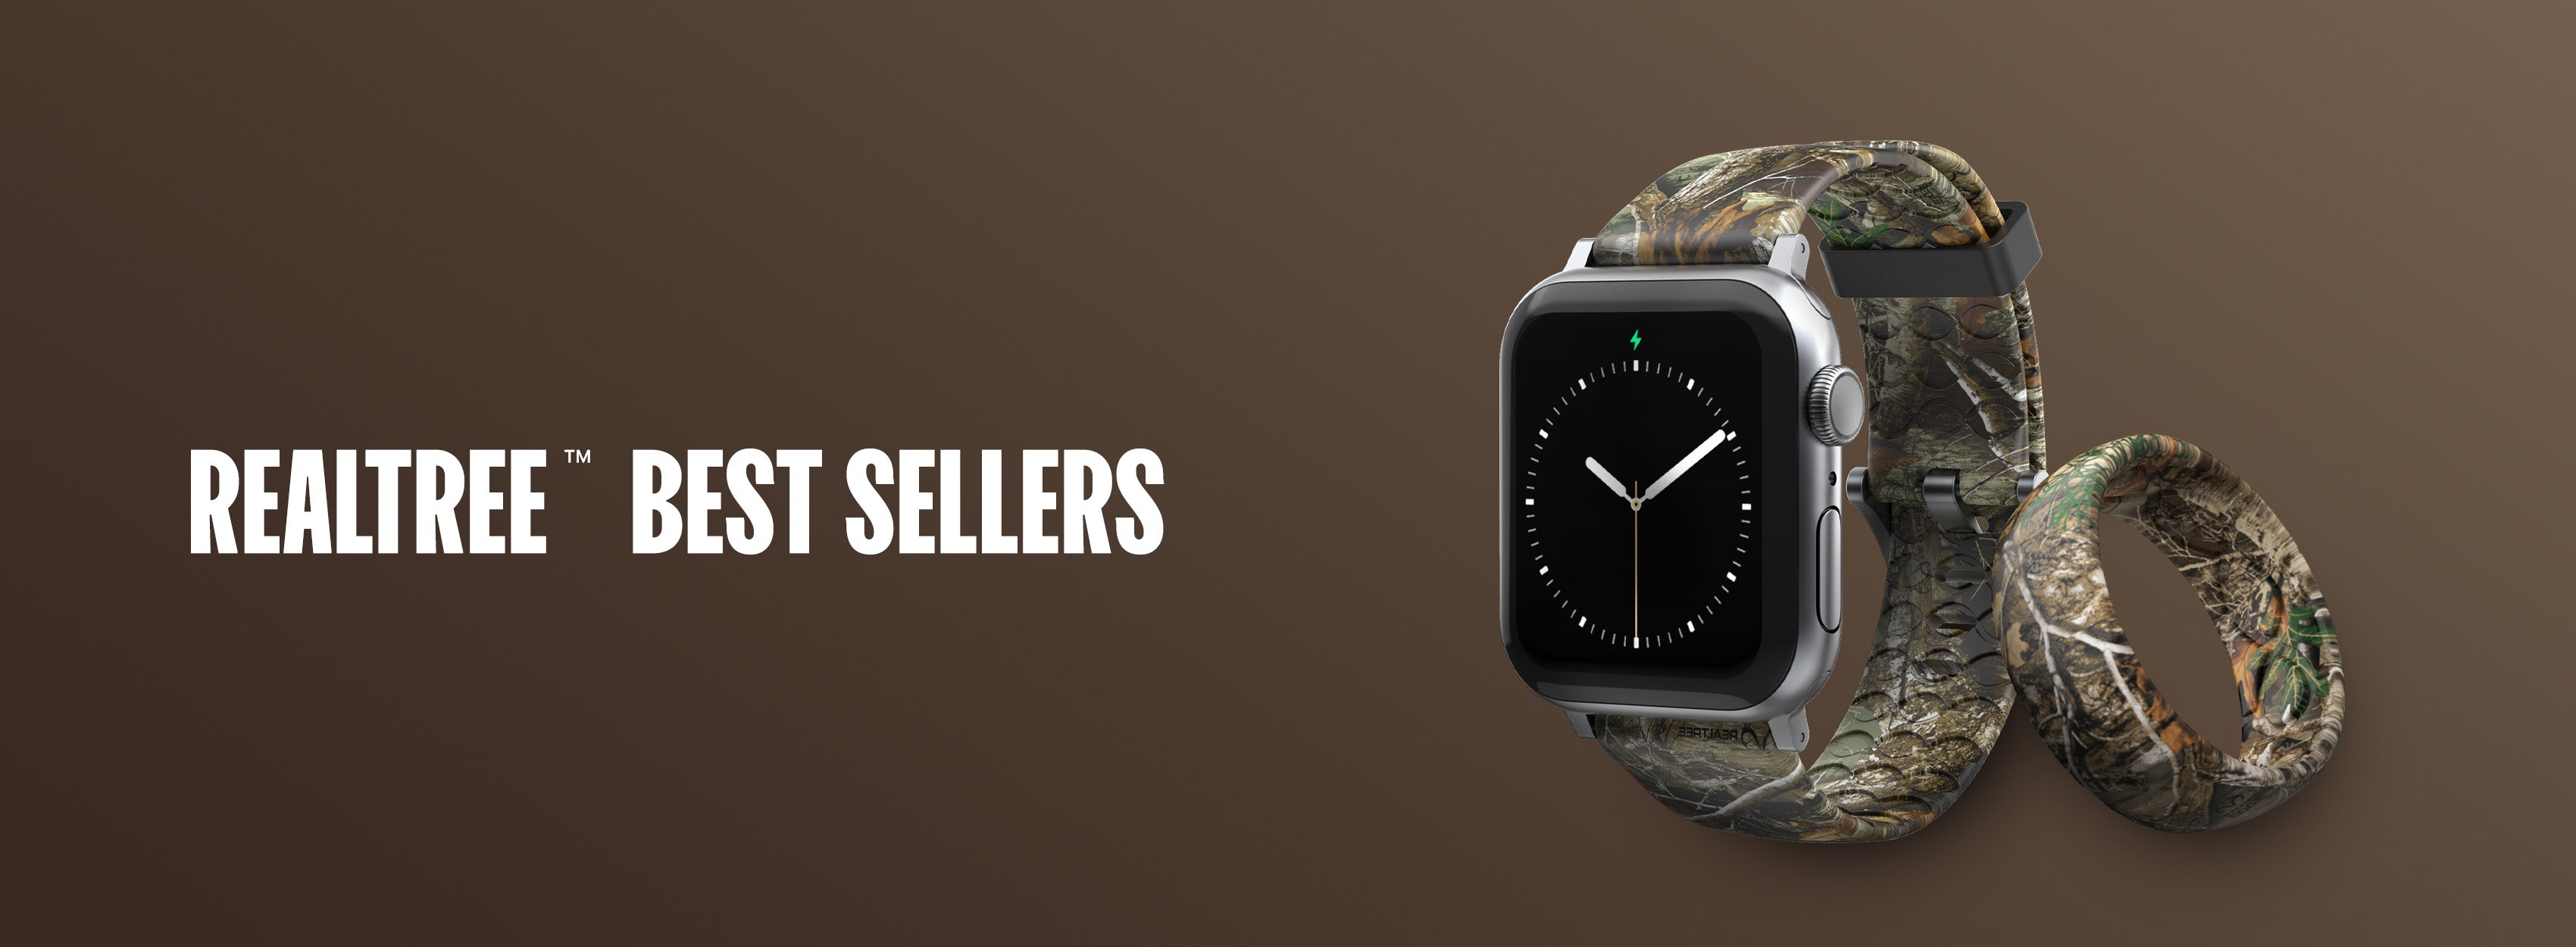 Realtree best sellers by Groove Life